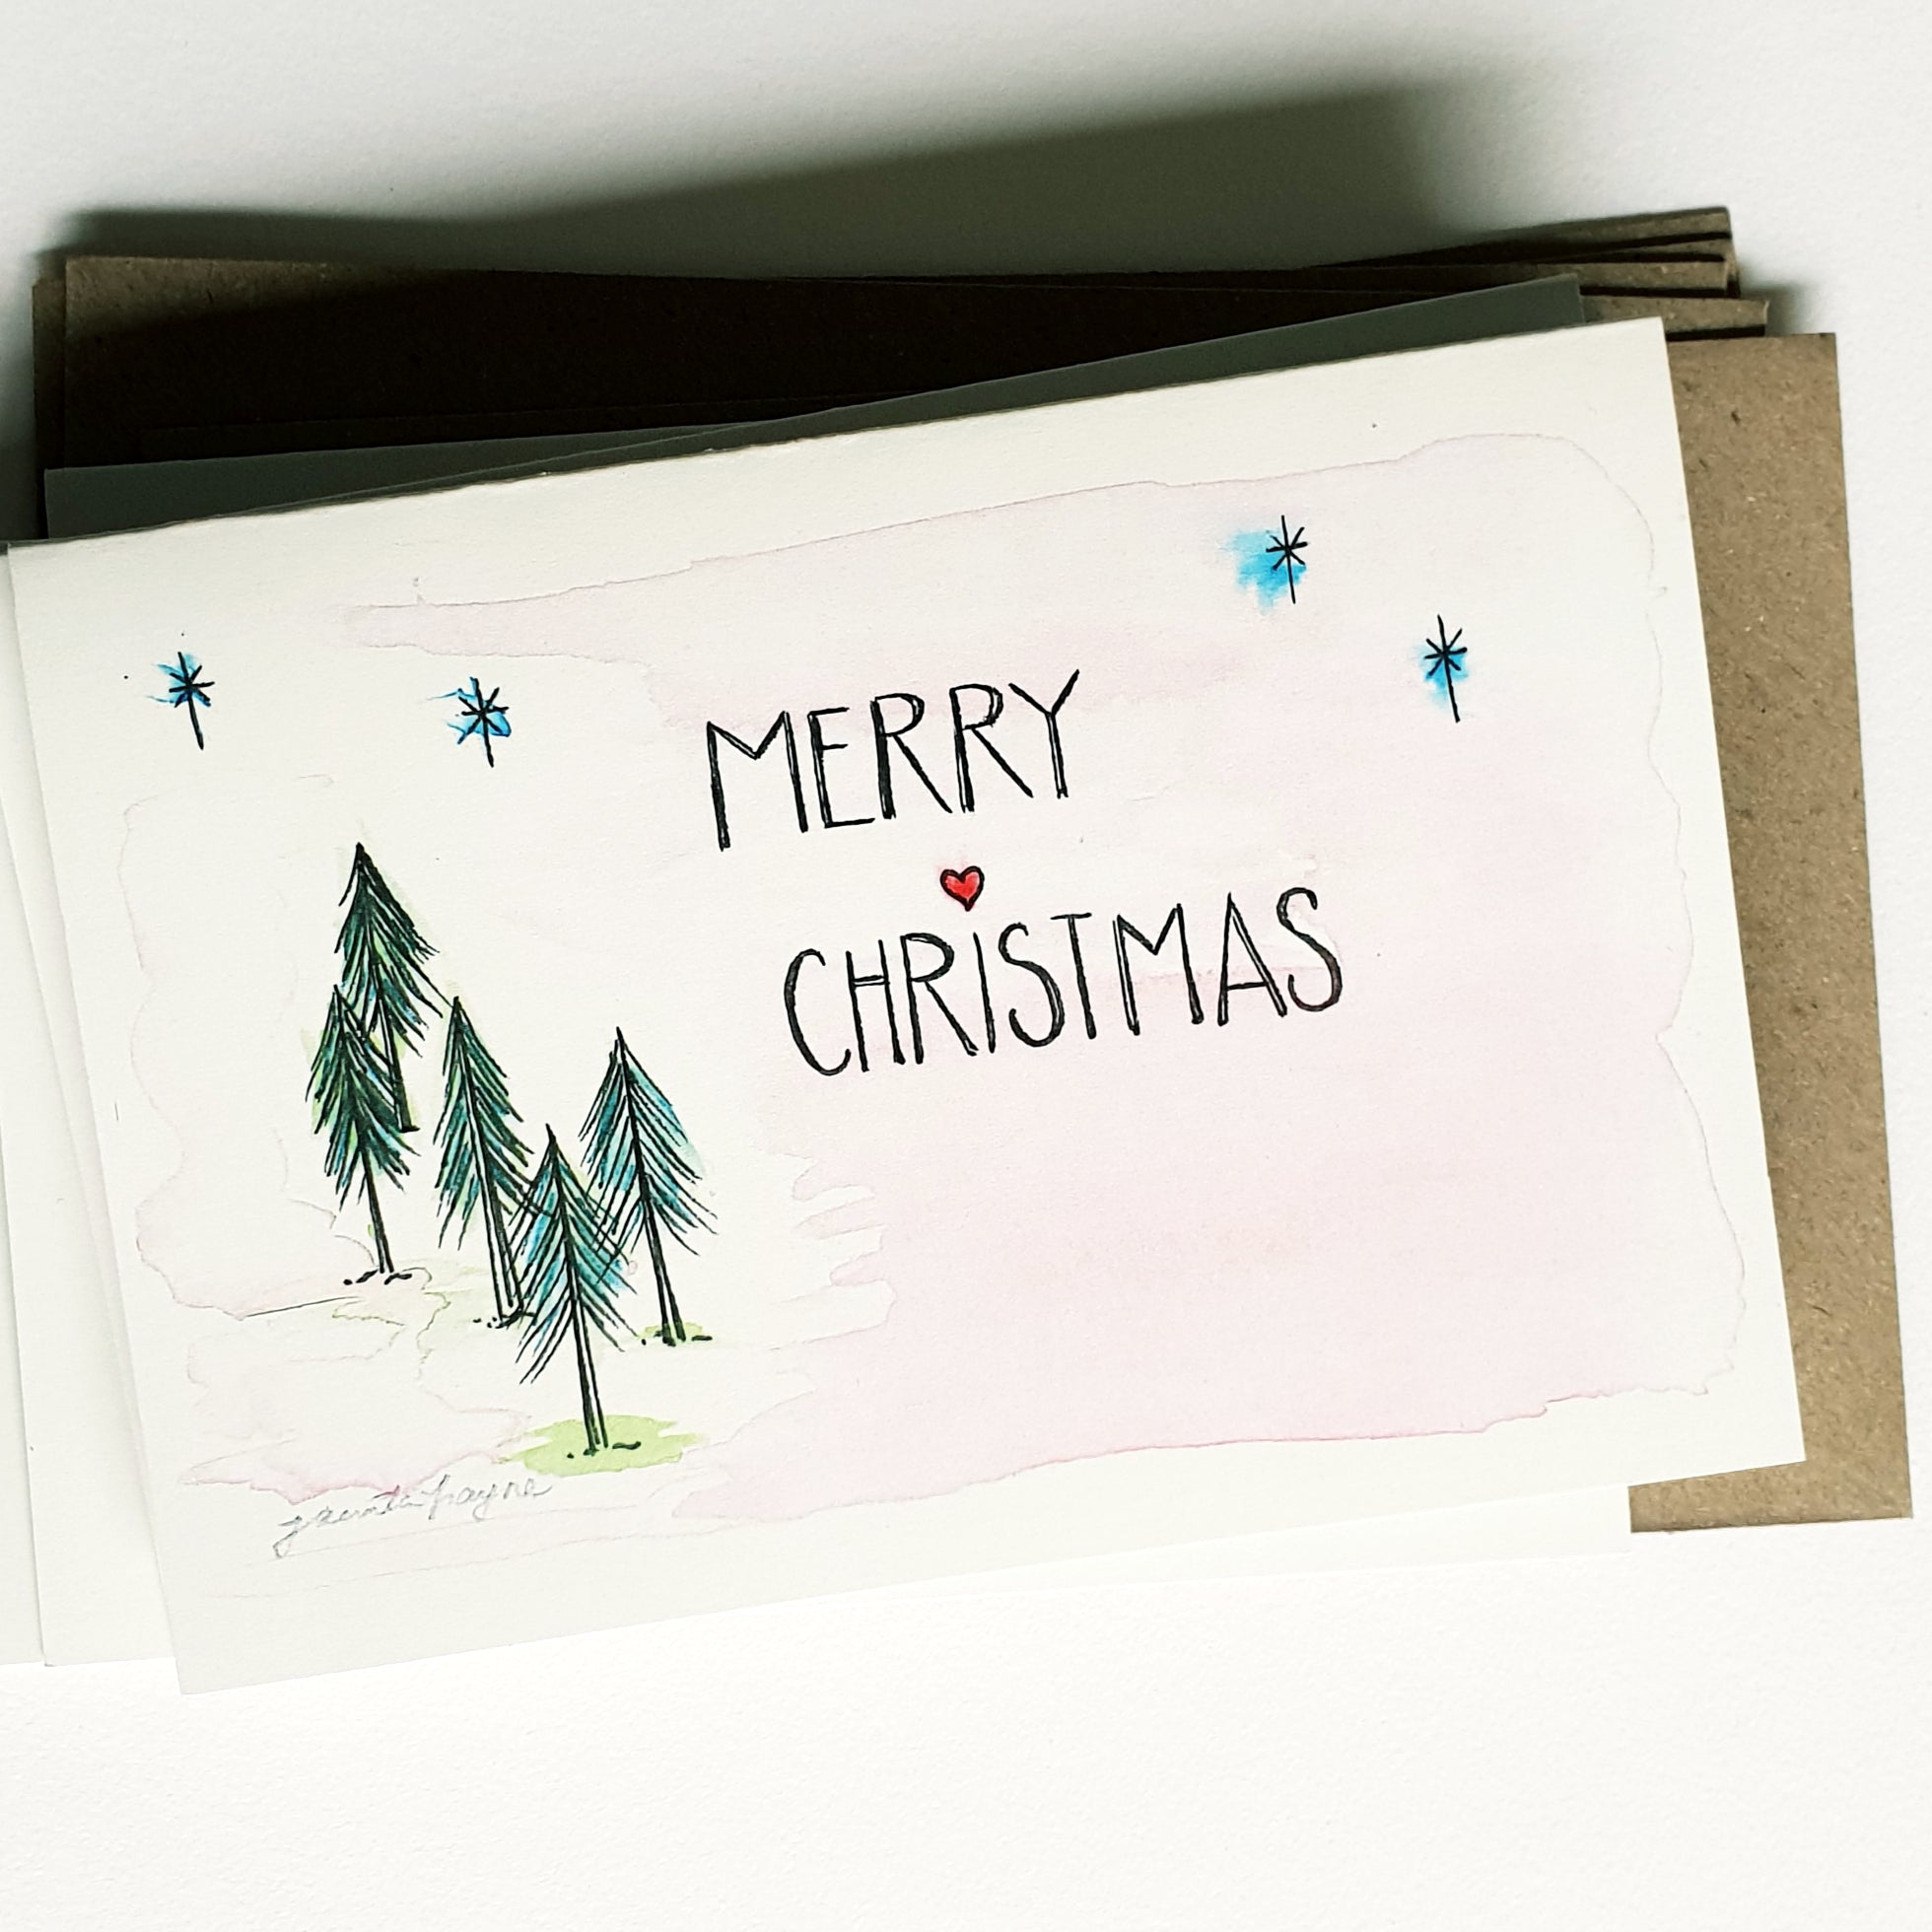 Christmas cards pack - Set of 5 "Merry Christmas" Fir Tree design cards in A6 size including envelopes